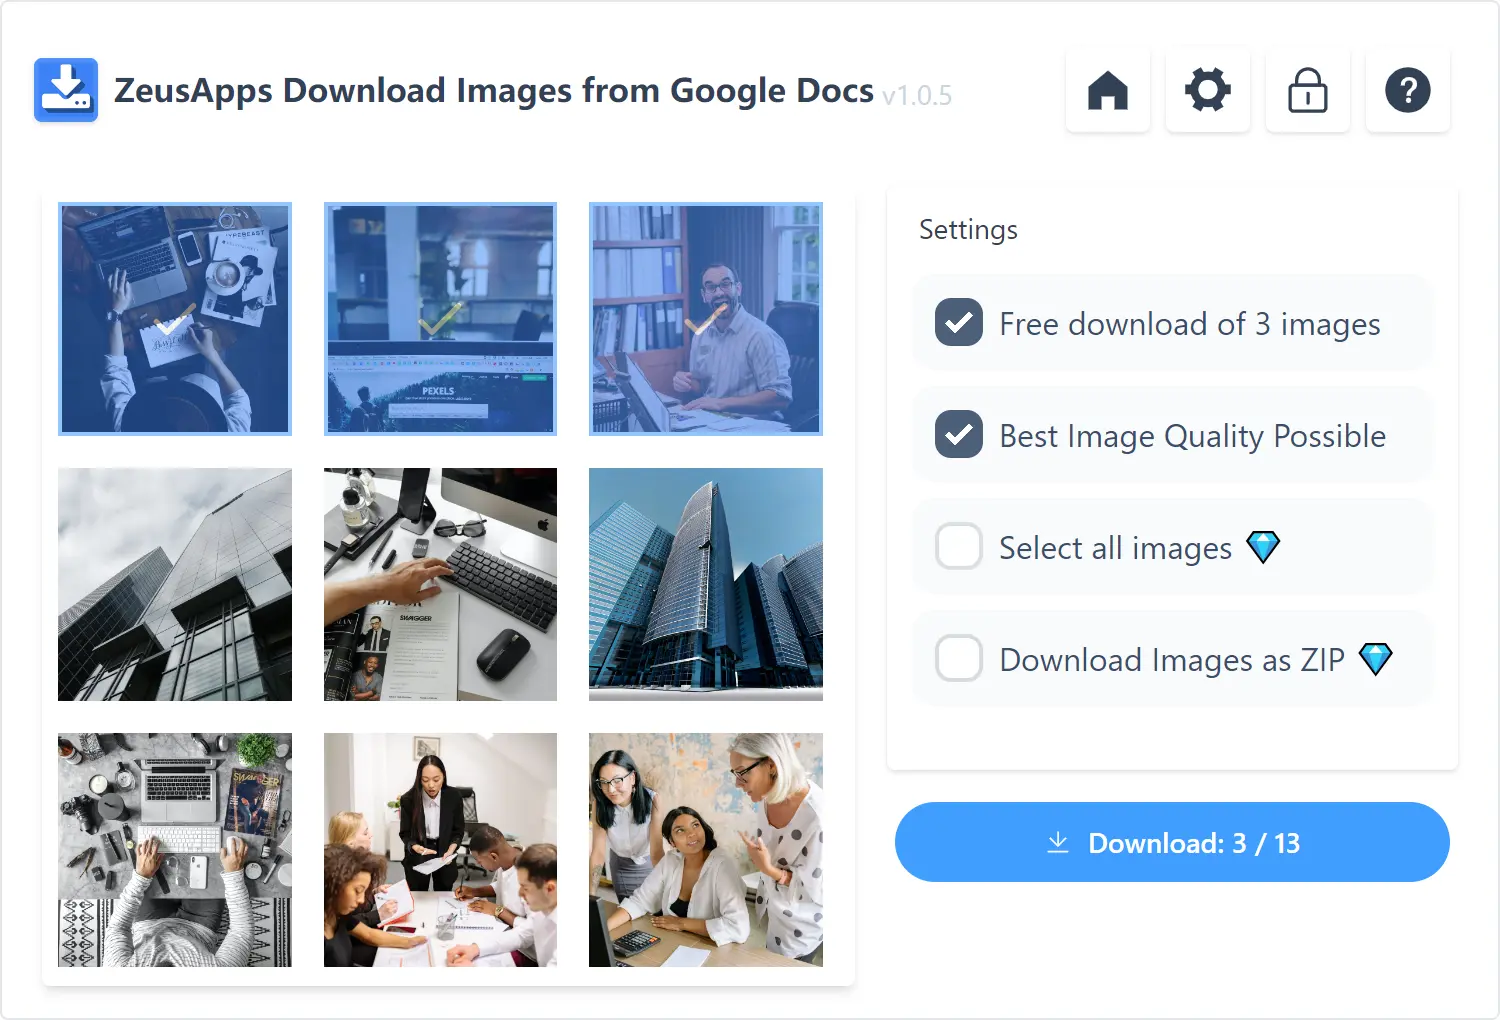 how to save an image from google docs